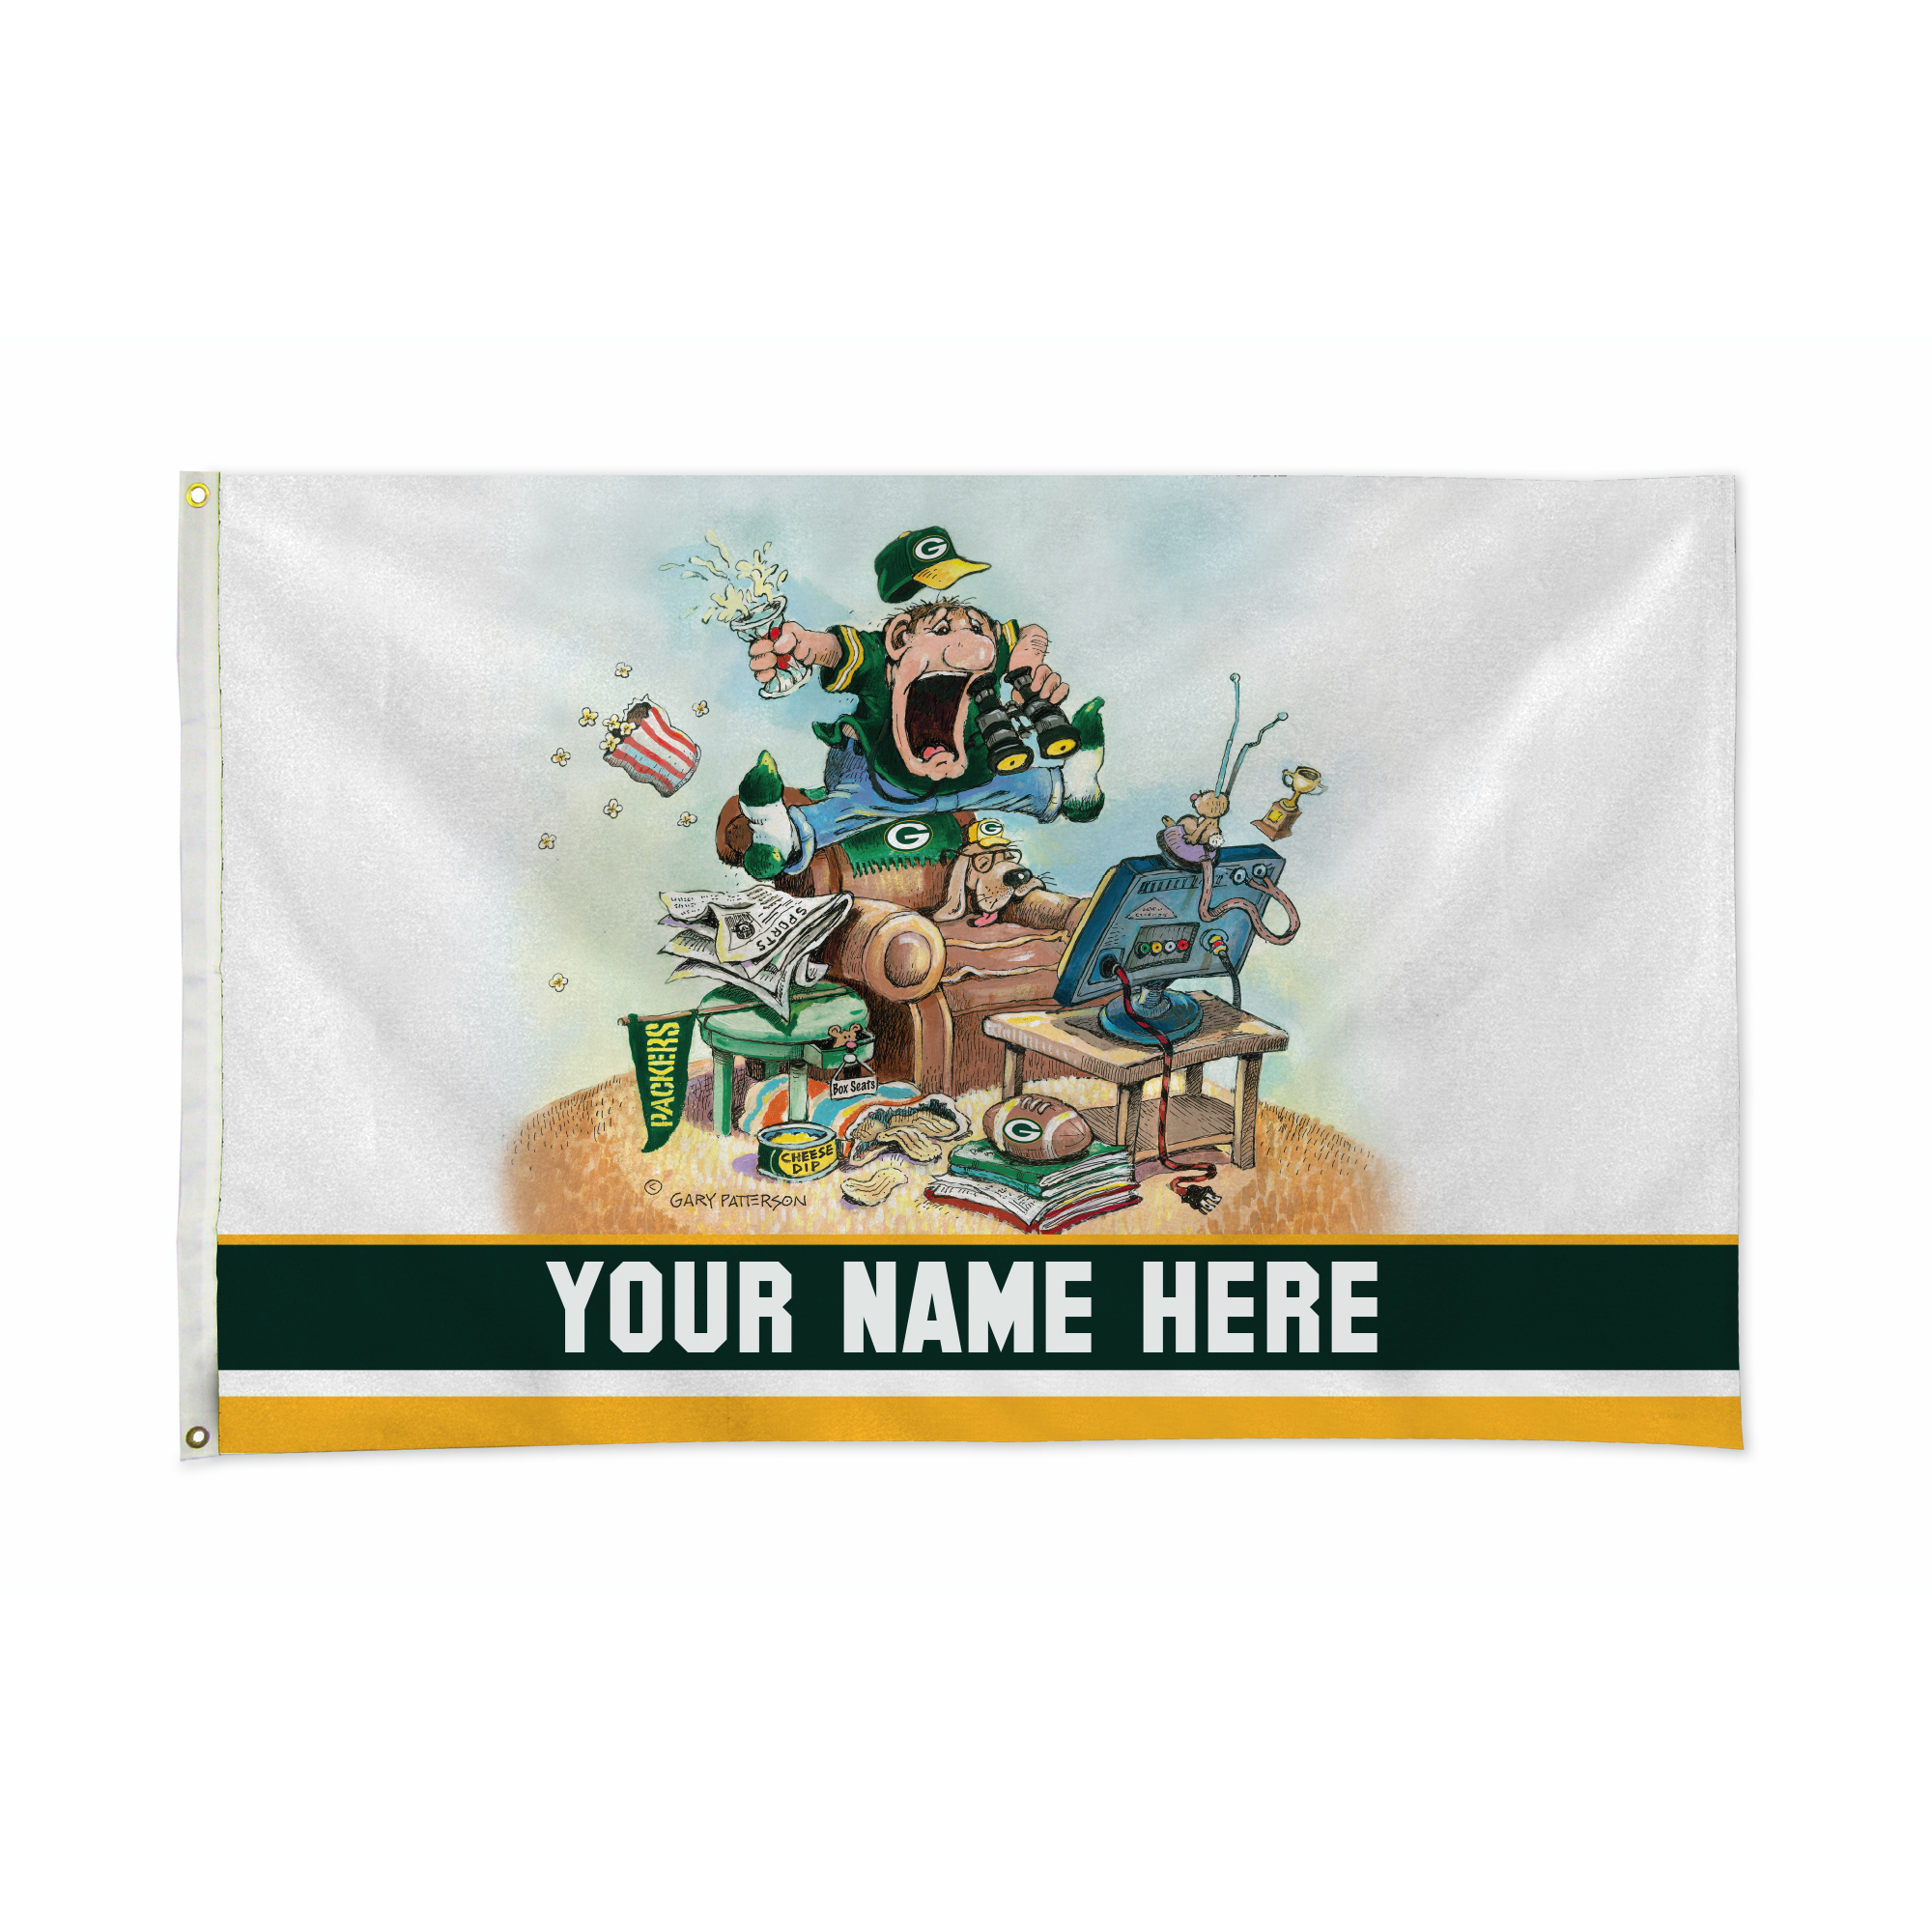 Rico Industries NFL Football Green Bay Packers "The Fan" by Gary Patterson Personalized 3' x 5' Banner Flag